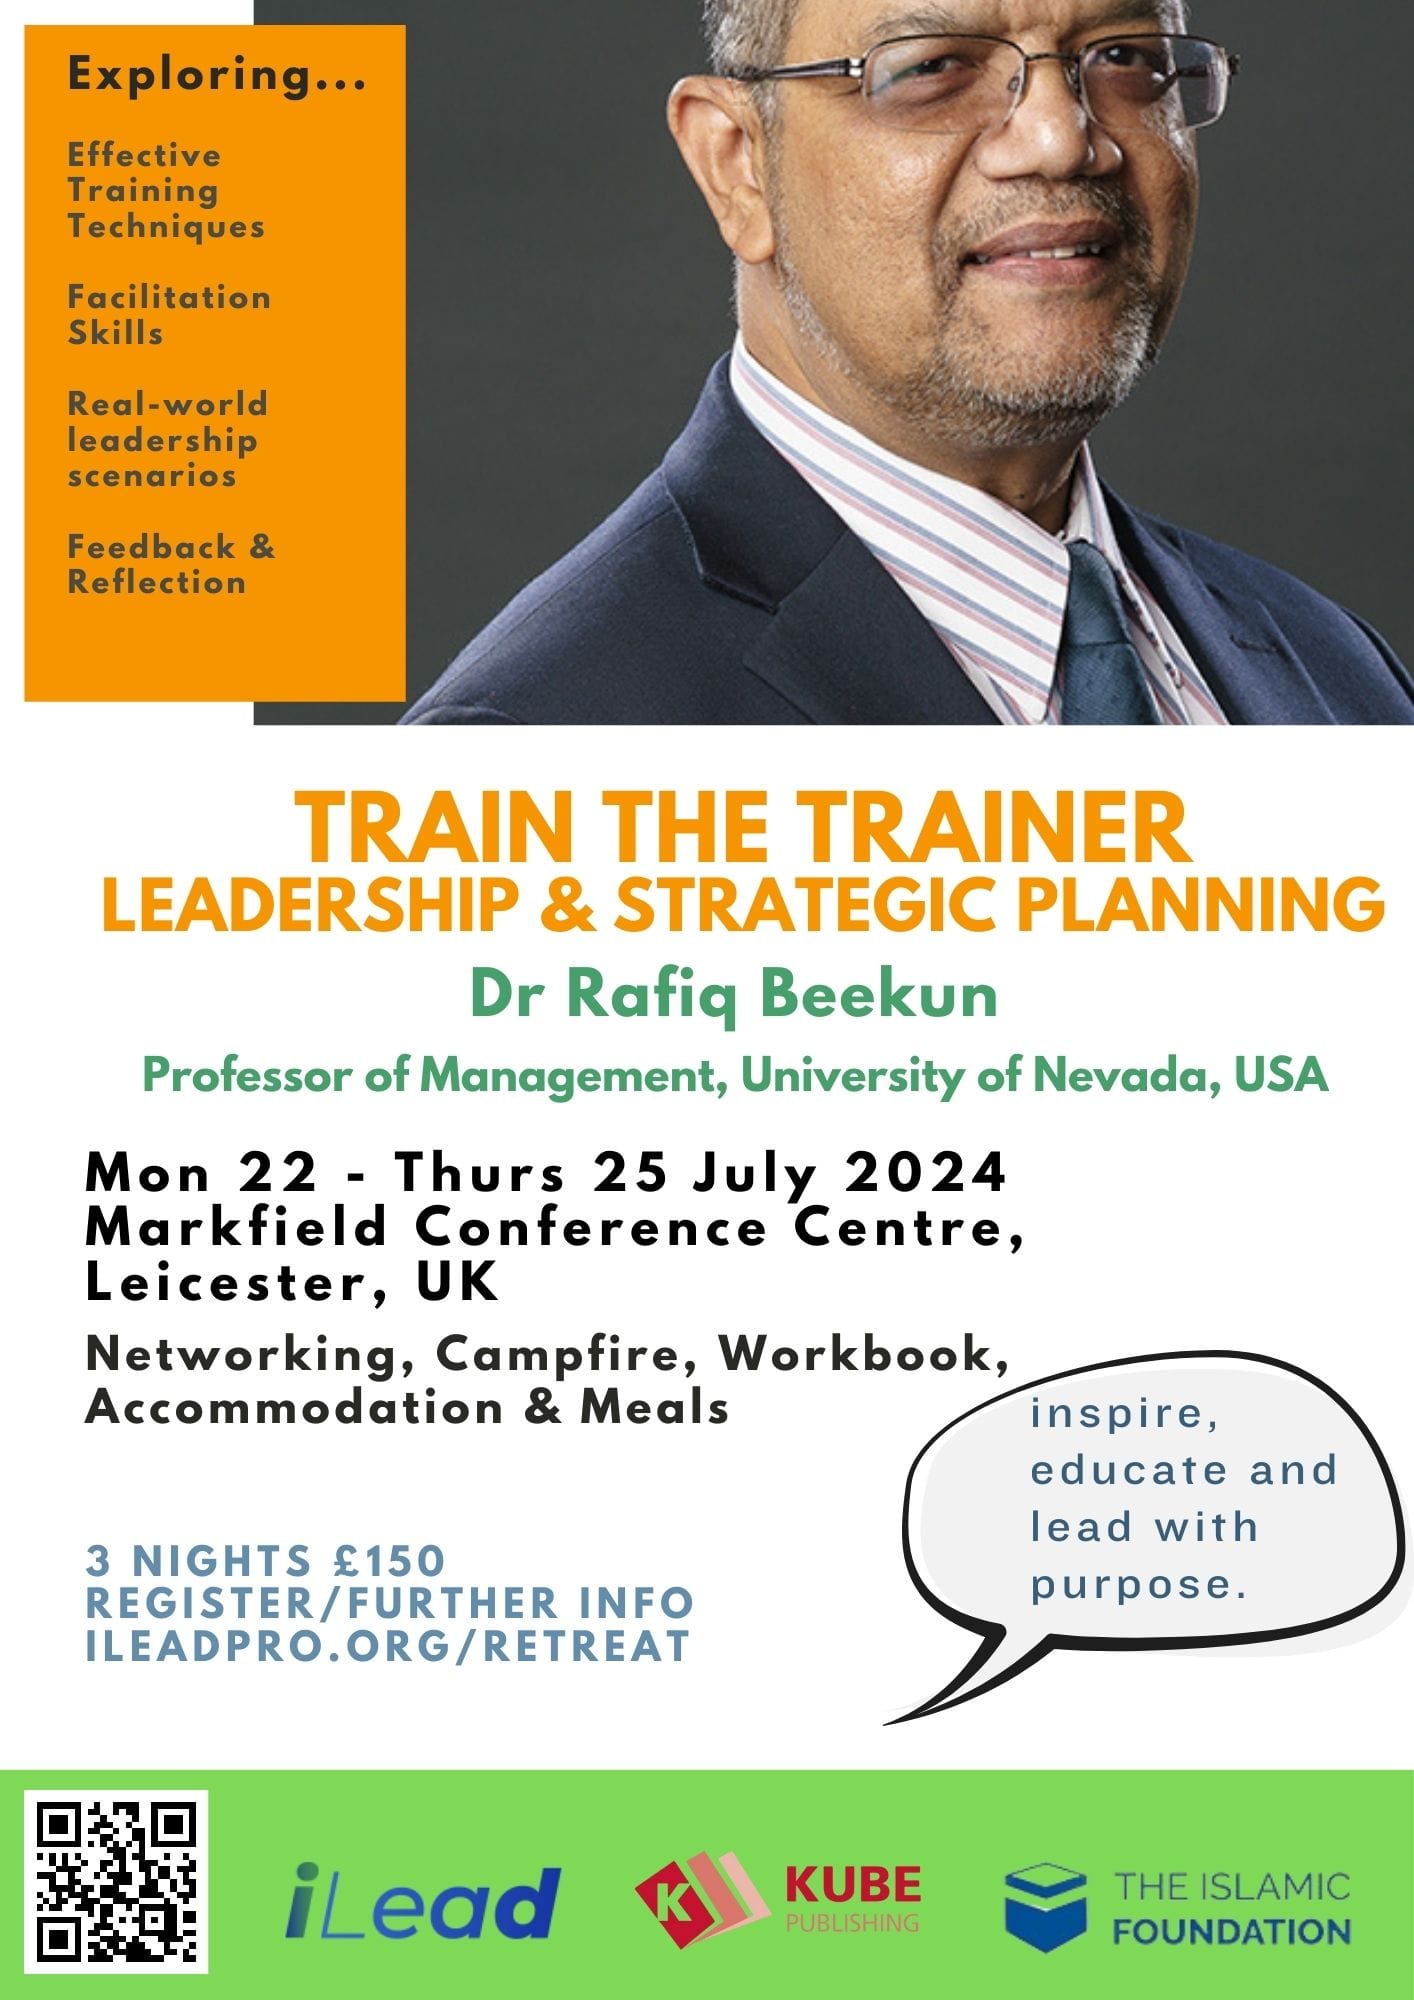 Train the Trainer Leadership & Strategy